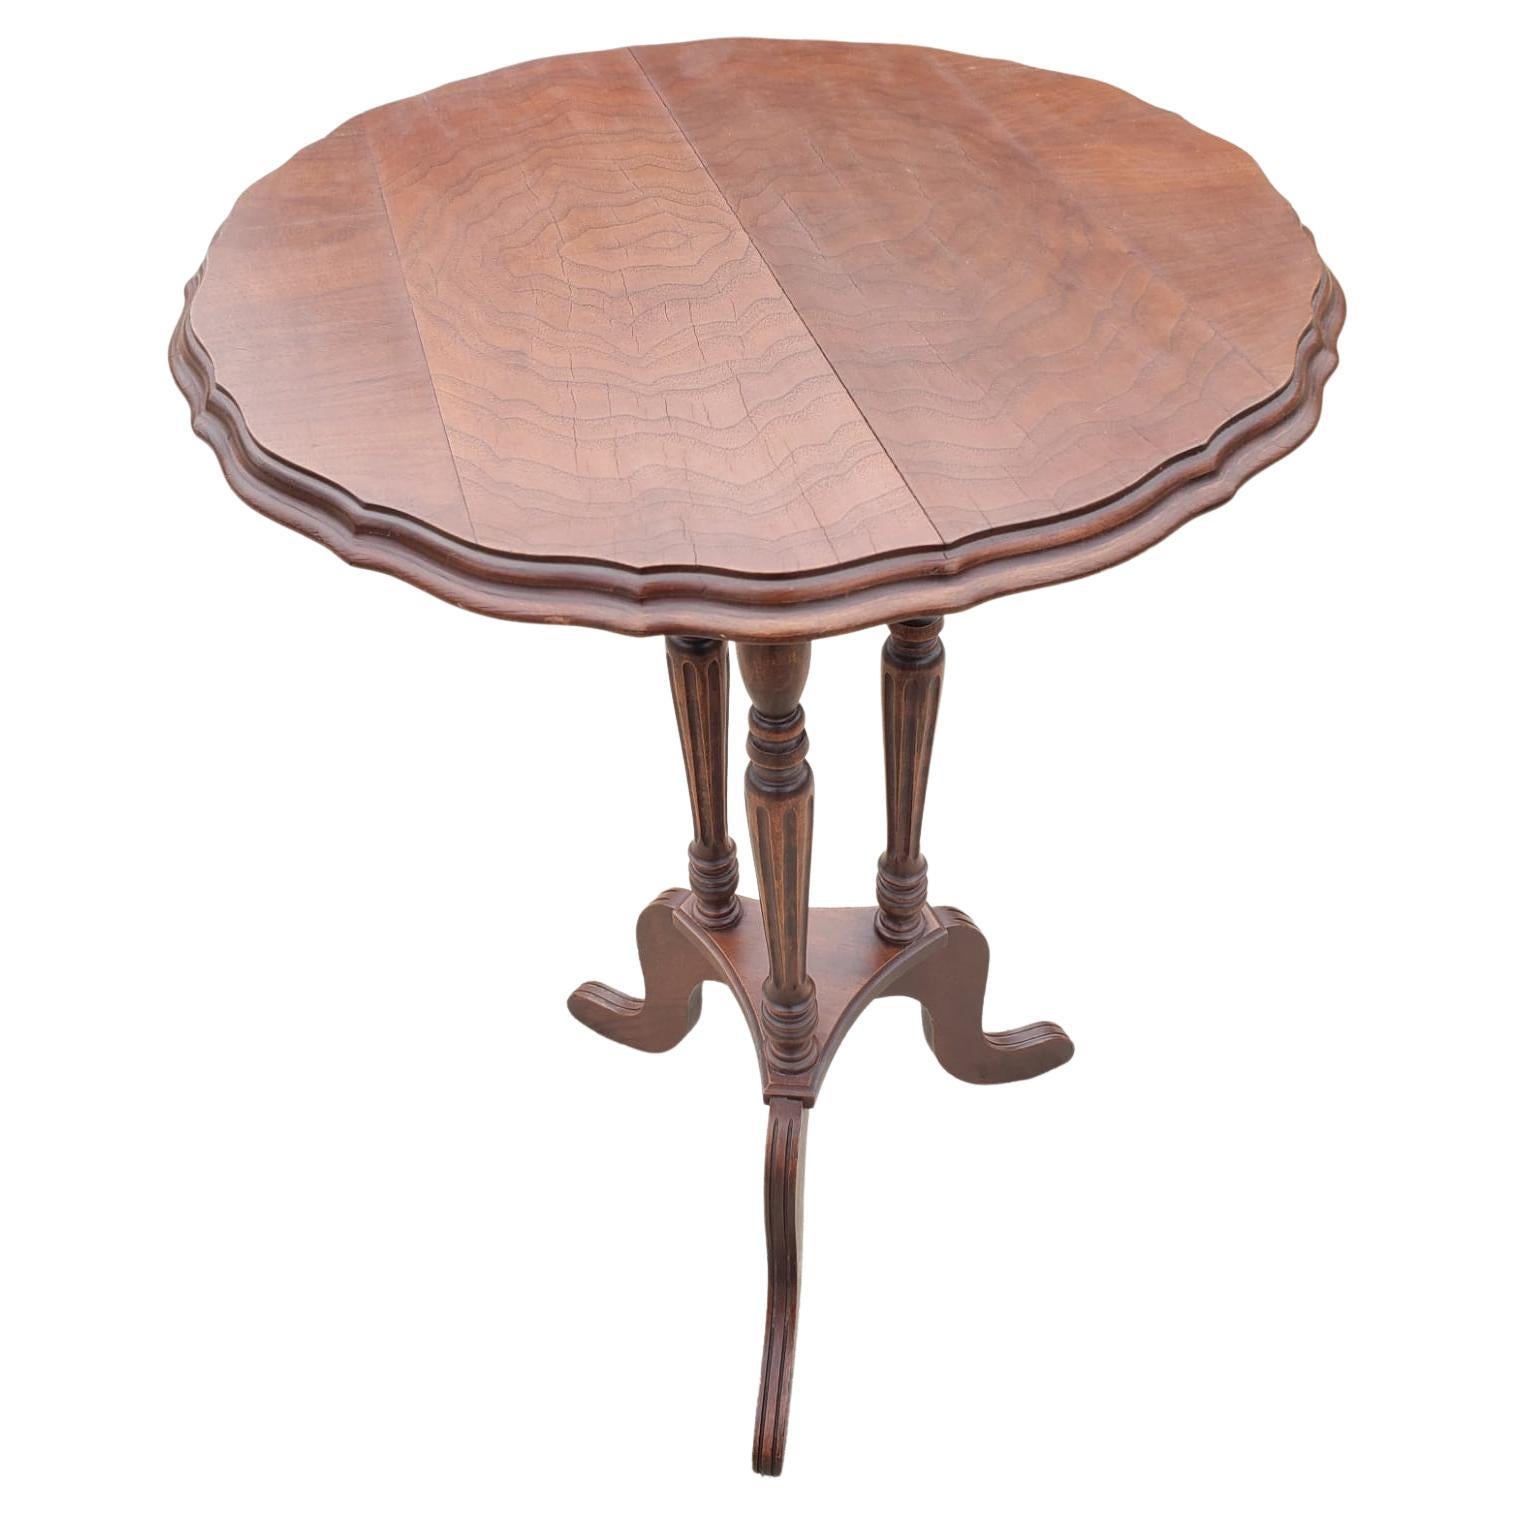 Antique Pedestal Tripod Walnut Side Table Plant Stand with Turned Legs For Sale